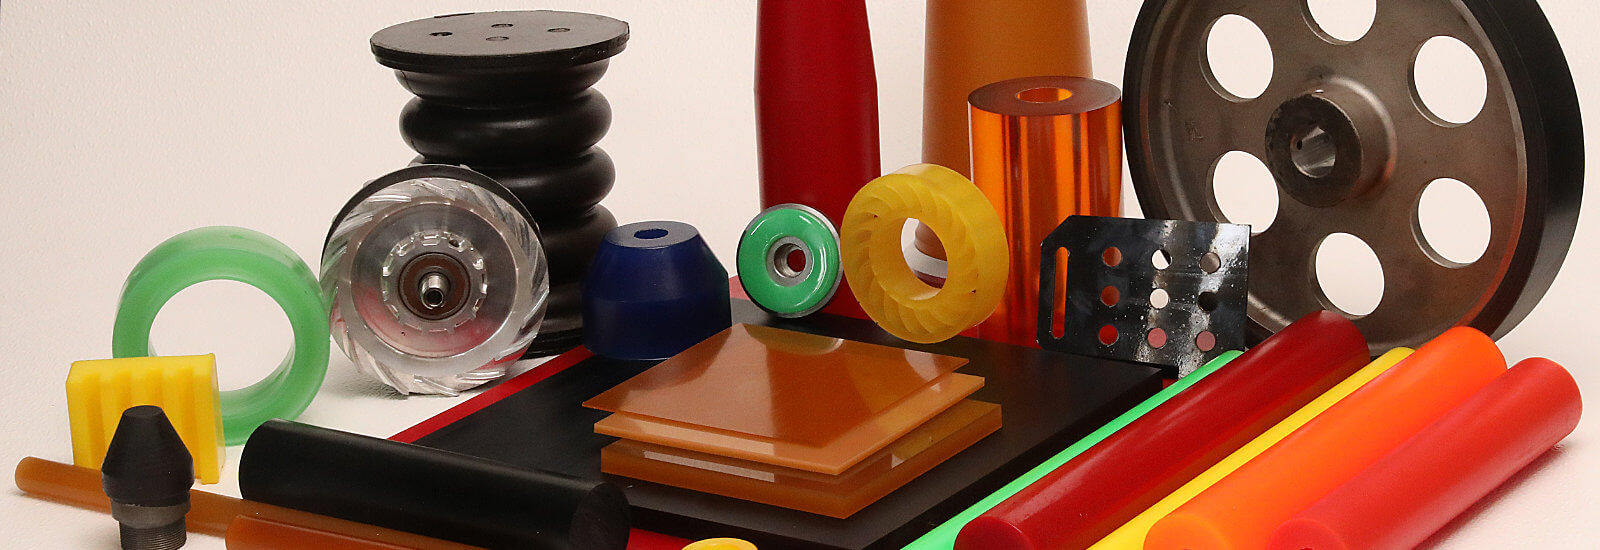 Various cast polyurethane products and cast urethane products by Pleiger Plastics